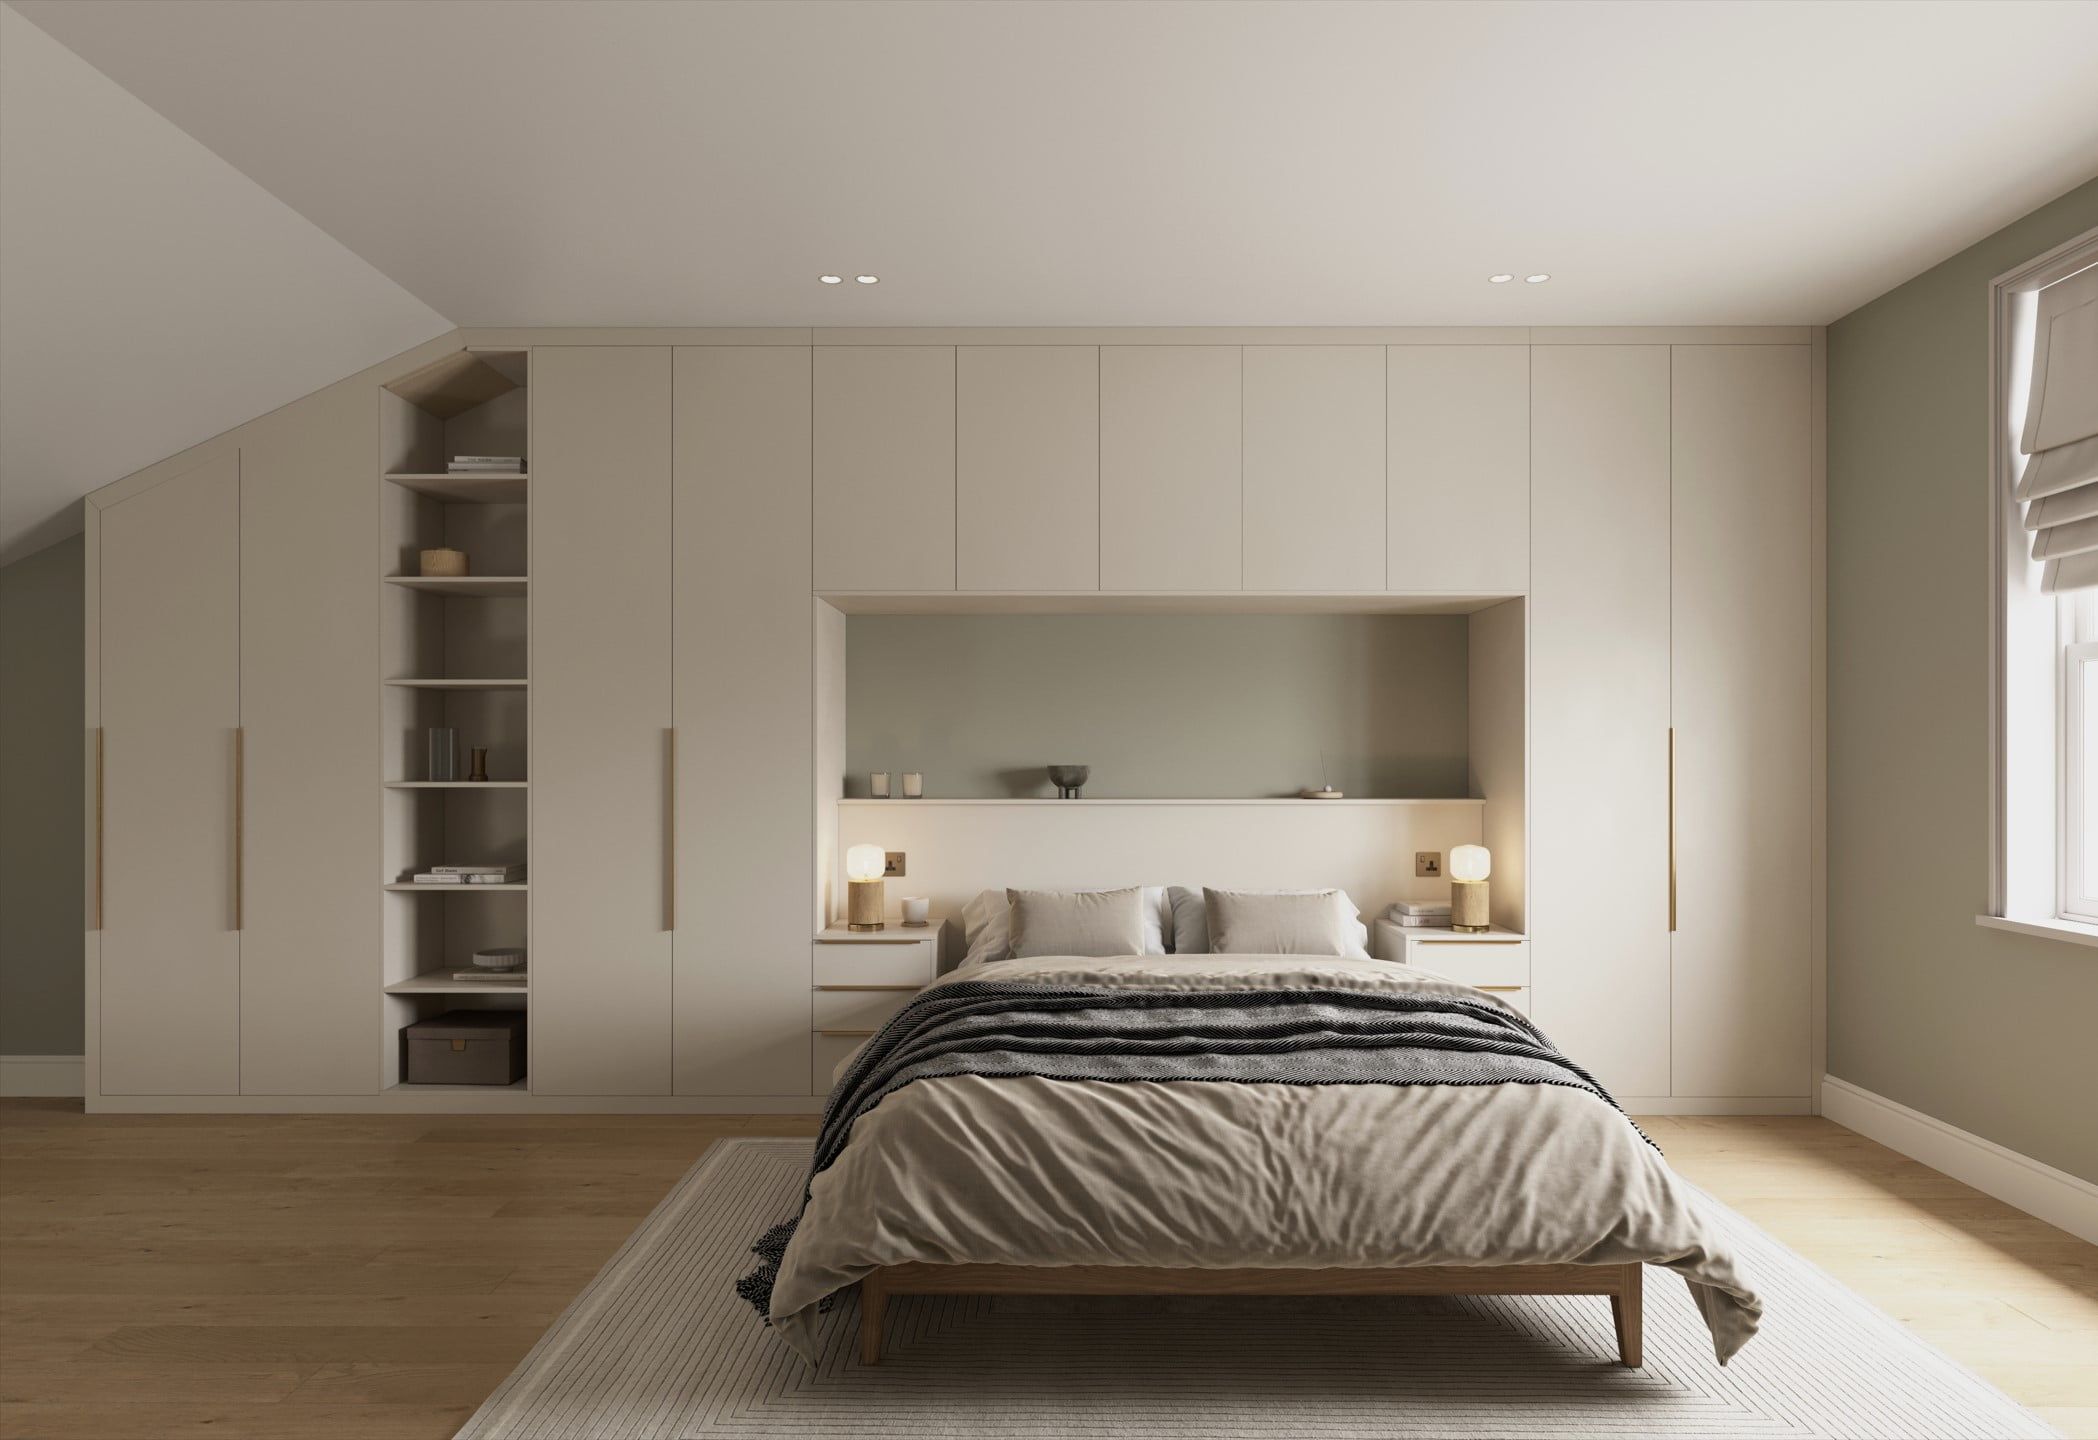 Overbed Fitted Wardrobes And Storage Units, Bespoke Overhead Storage Inside Overbed Wardrobes (View 7 of 20)